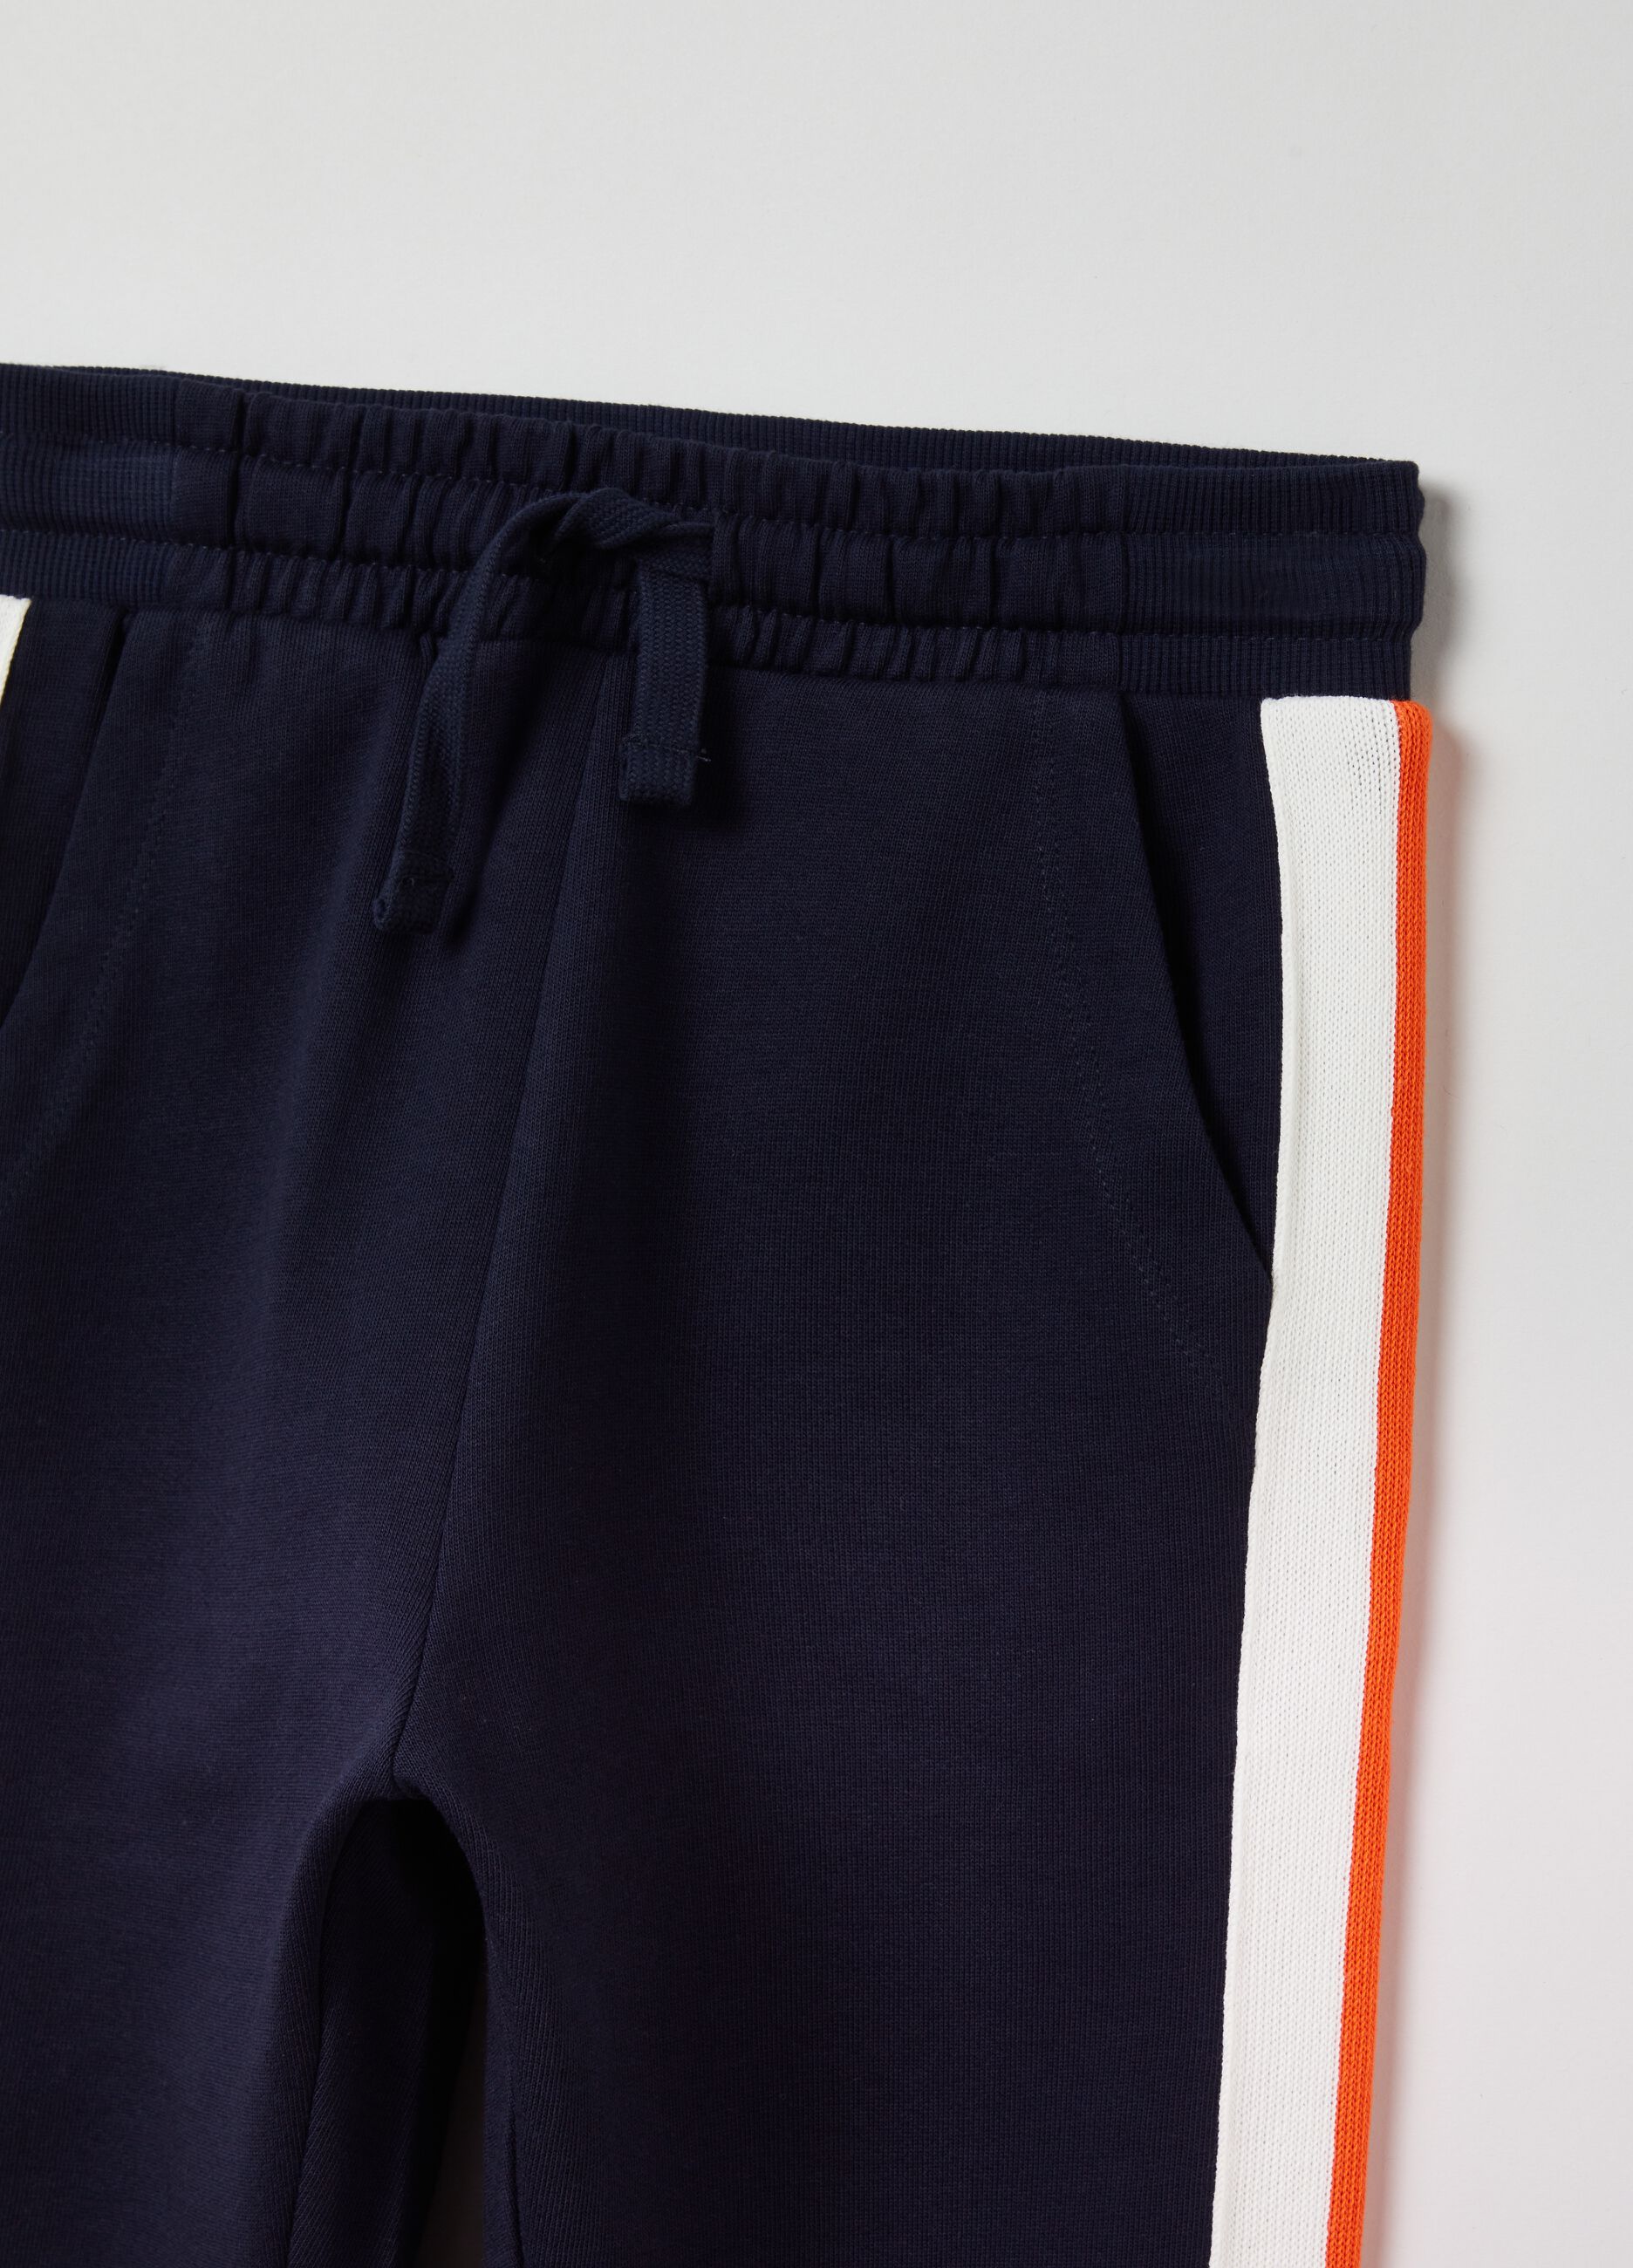 Joggers with drawstrings and contrasting bands_2